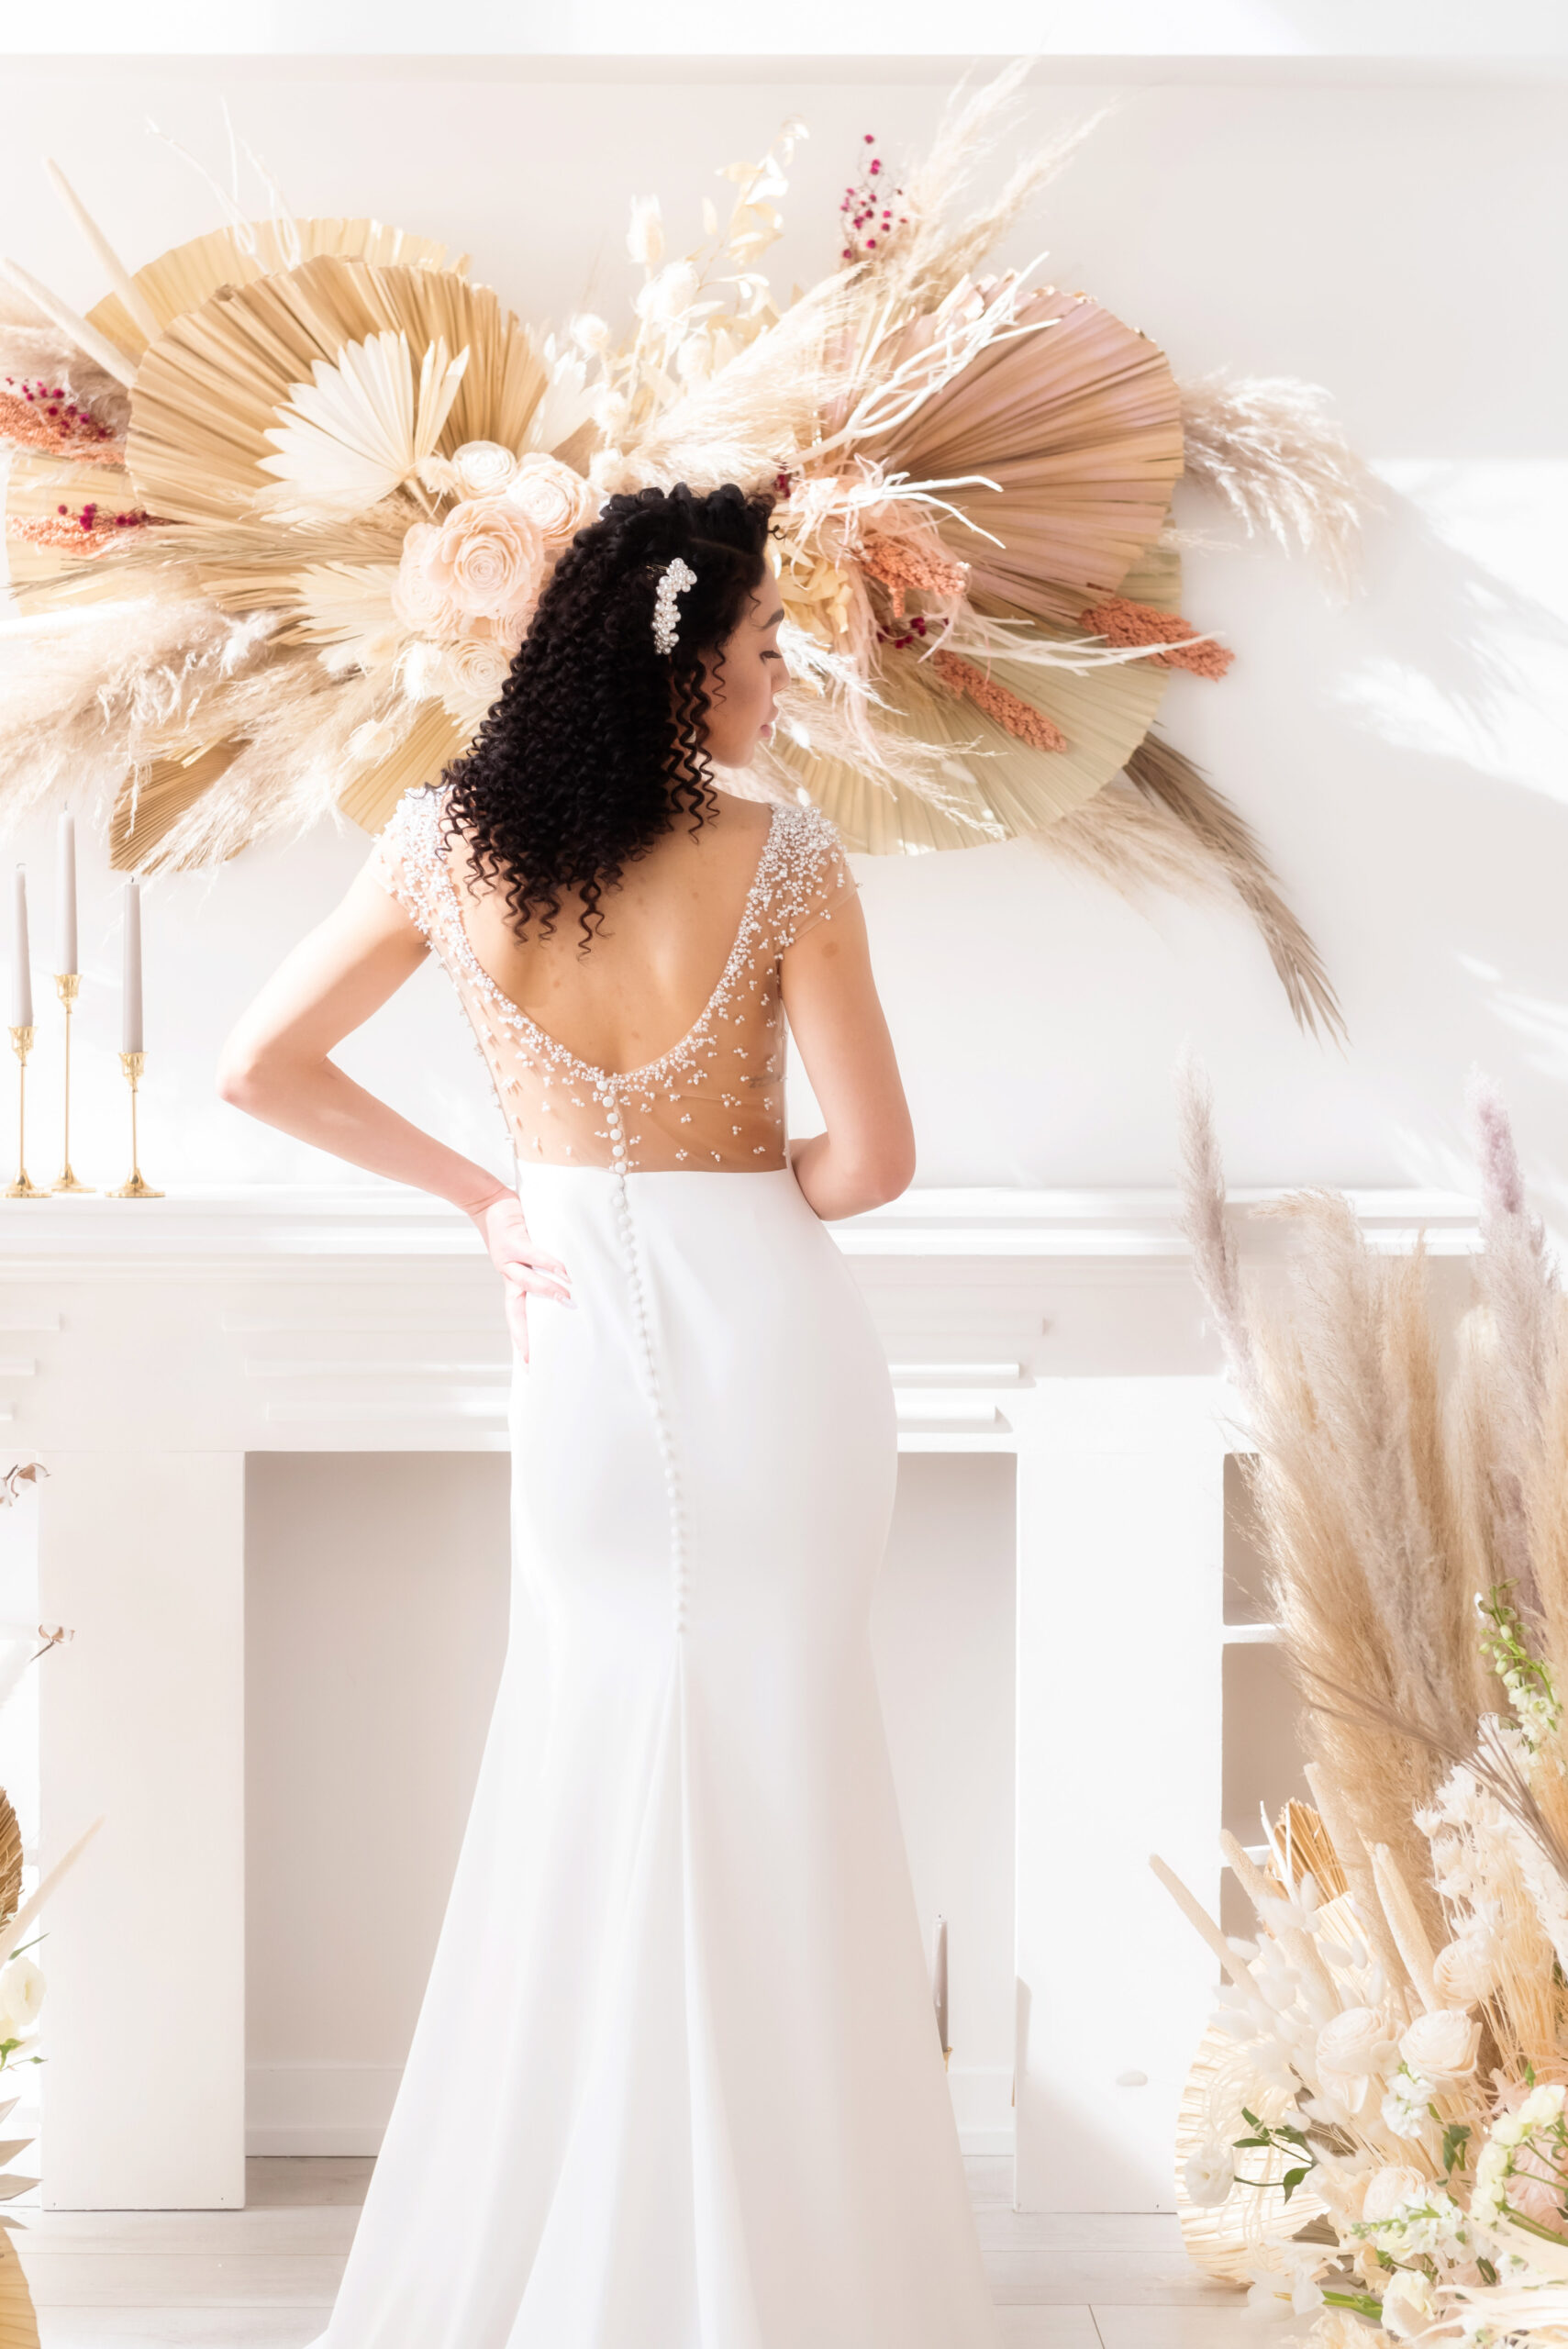 Bride in modern sleeveless wedding gown with sexy low back and illusion pearl details in all white wedding venue